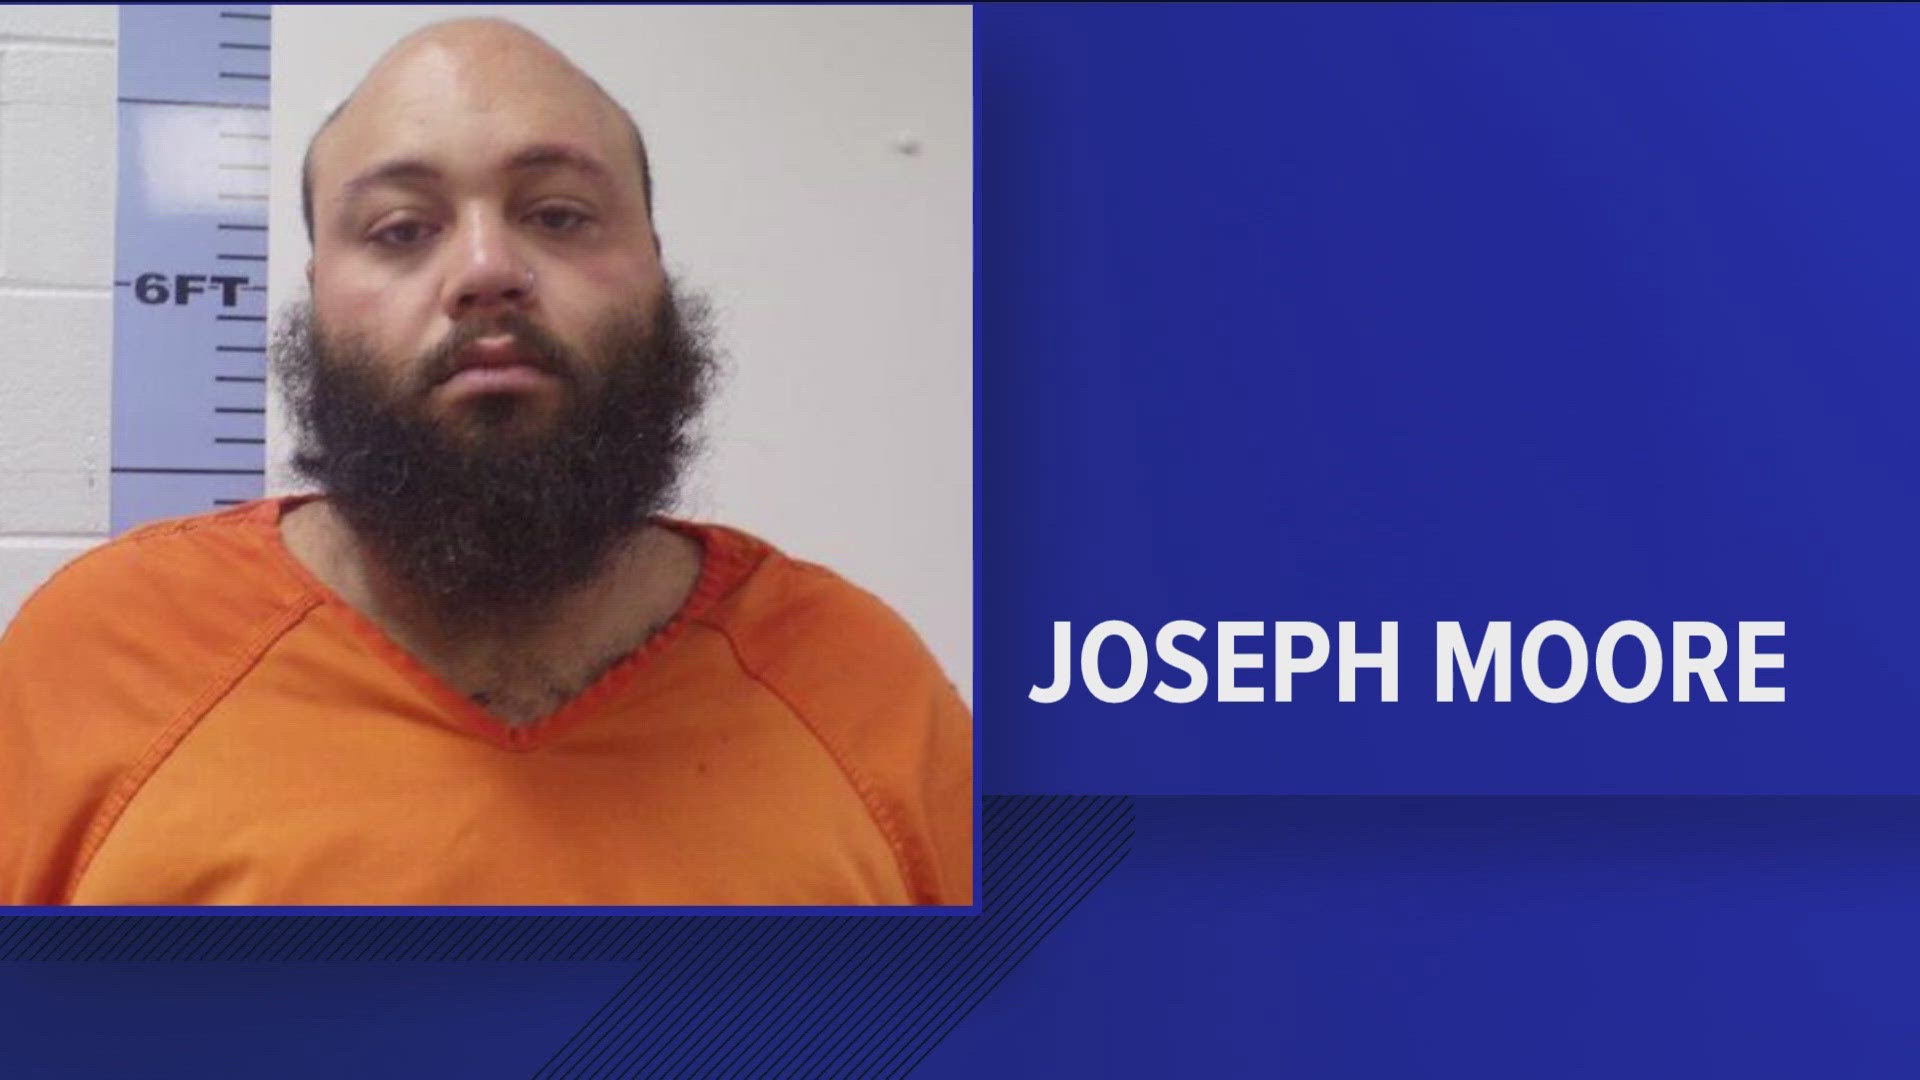 Joseph Moore, 27, pleaded guilty to 12 charges in May. On Tuesday, he was sentenced to prison for an "indefinite term" of 40-45 years in prison.